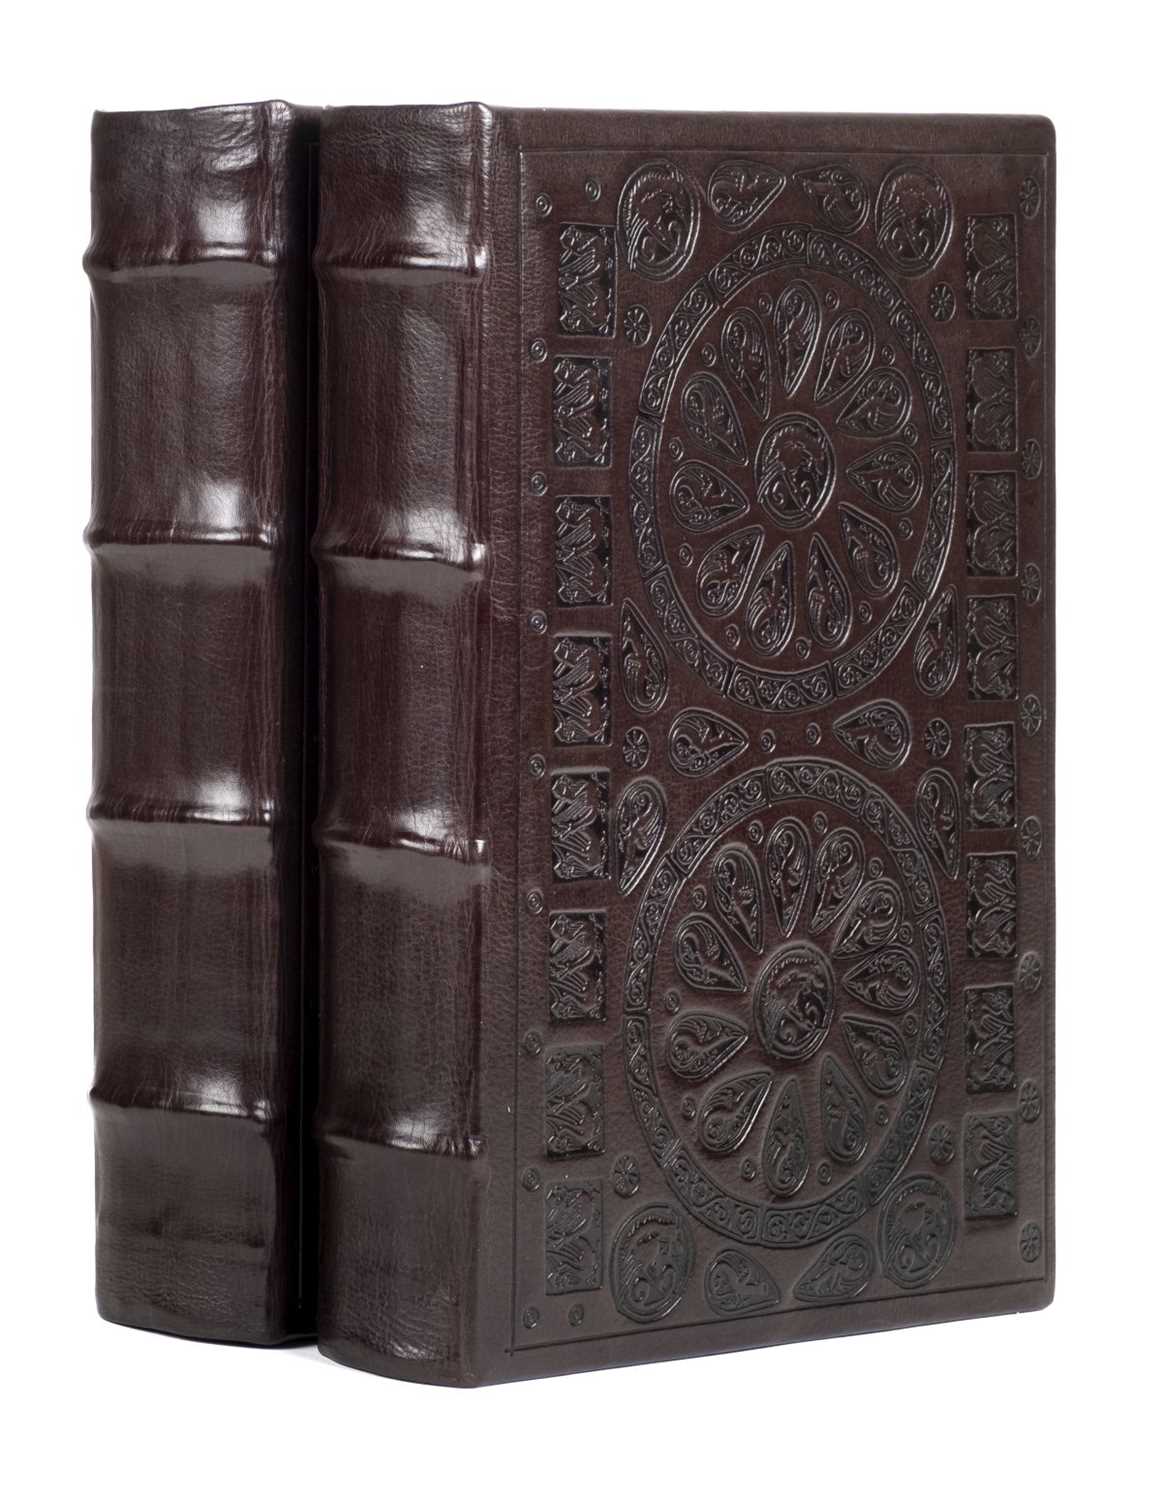 Lot 390 - Domesday. The Millennium Edition of Great Domesday Book, 6 volumes, 2000